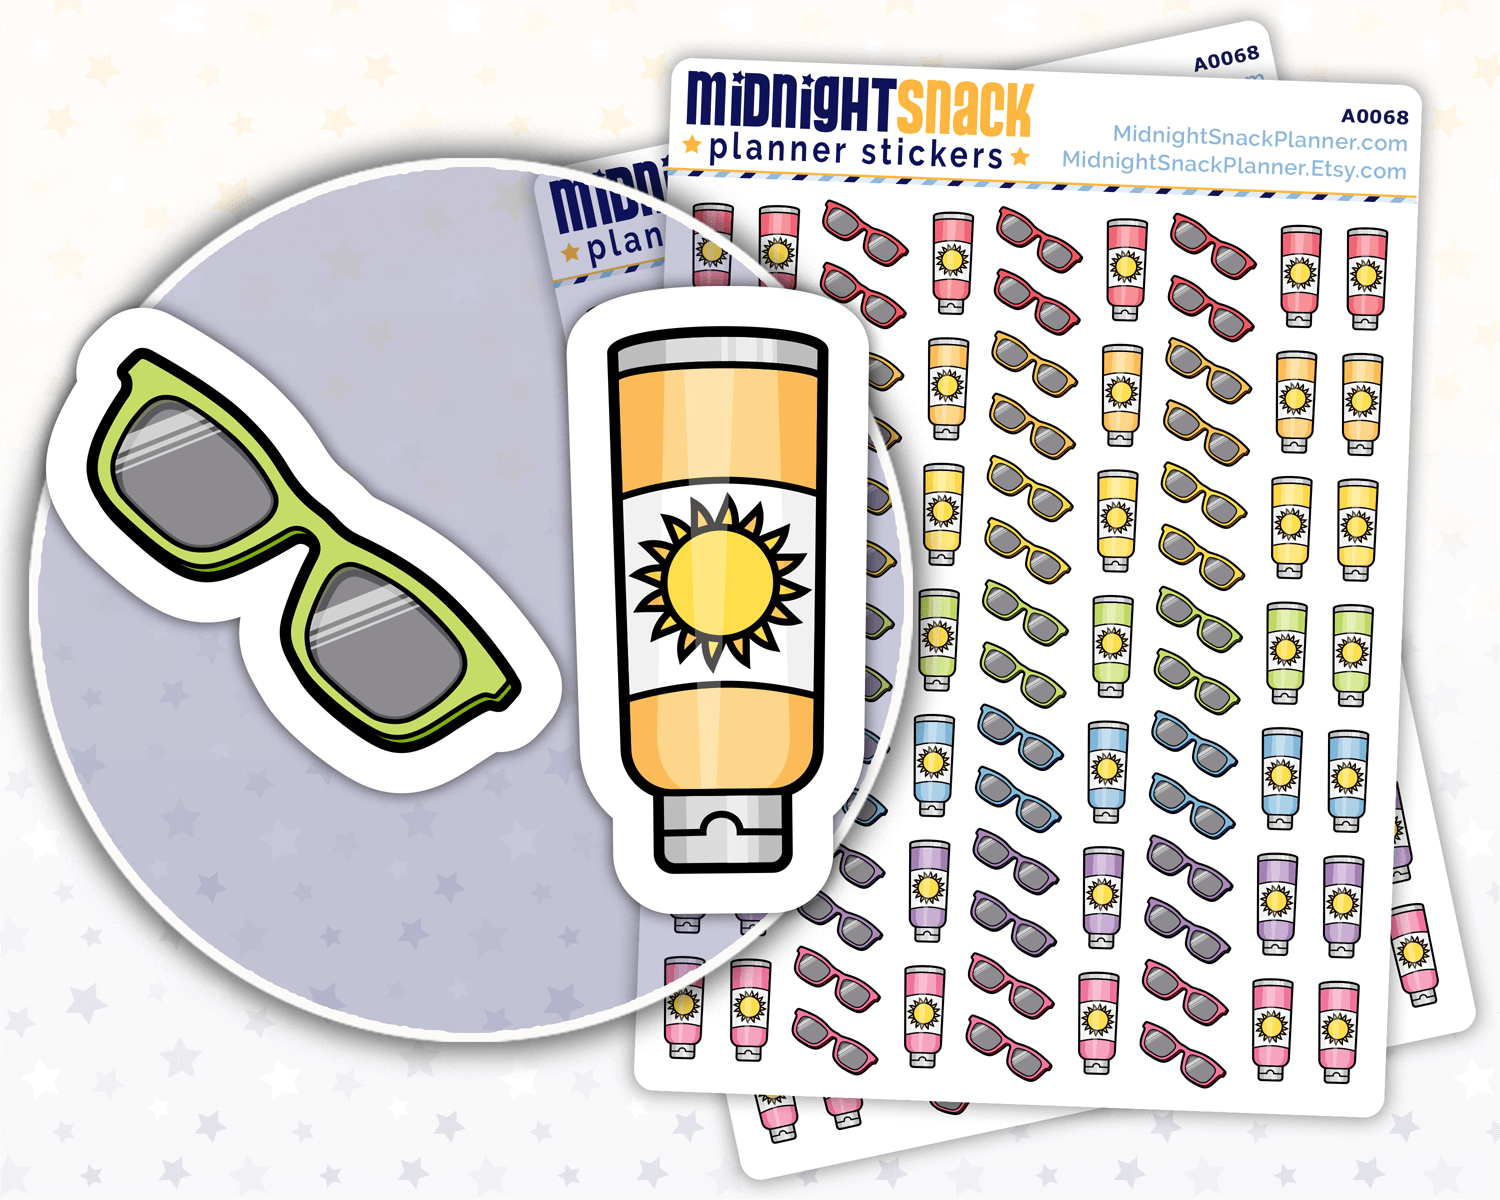 Summer sun protection planner stickers. Featuring hand drawn sunscreen and sunglasses icons in a variety of colours. 